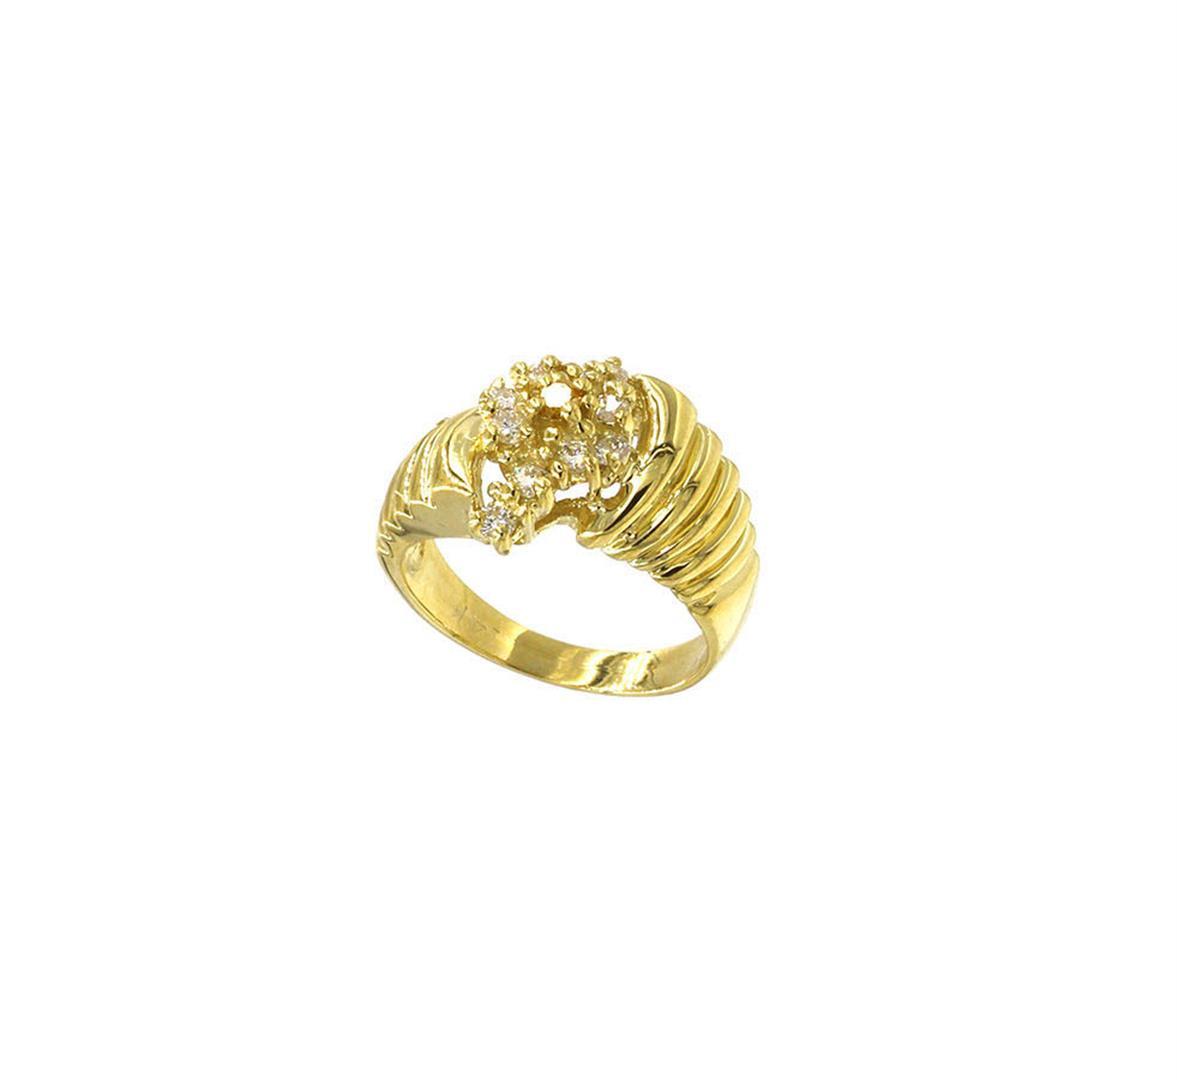 0.25 ctw Diamond Cocktail Ring - 14KT Yellow Gold